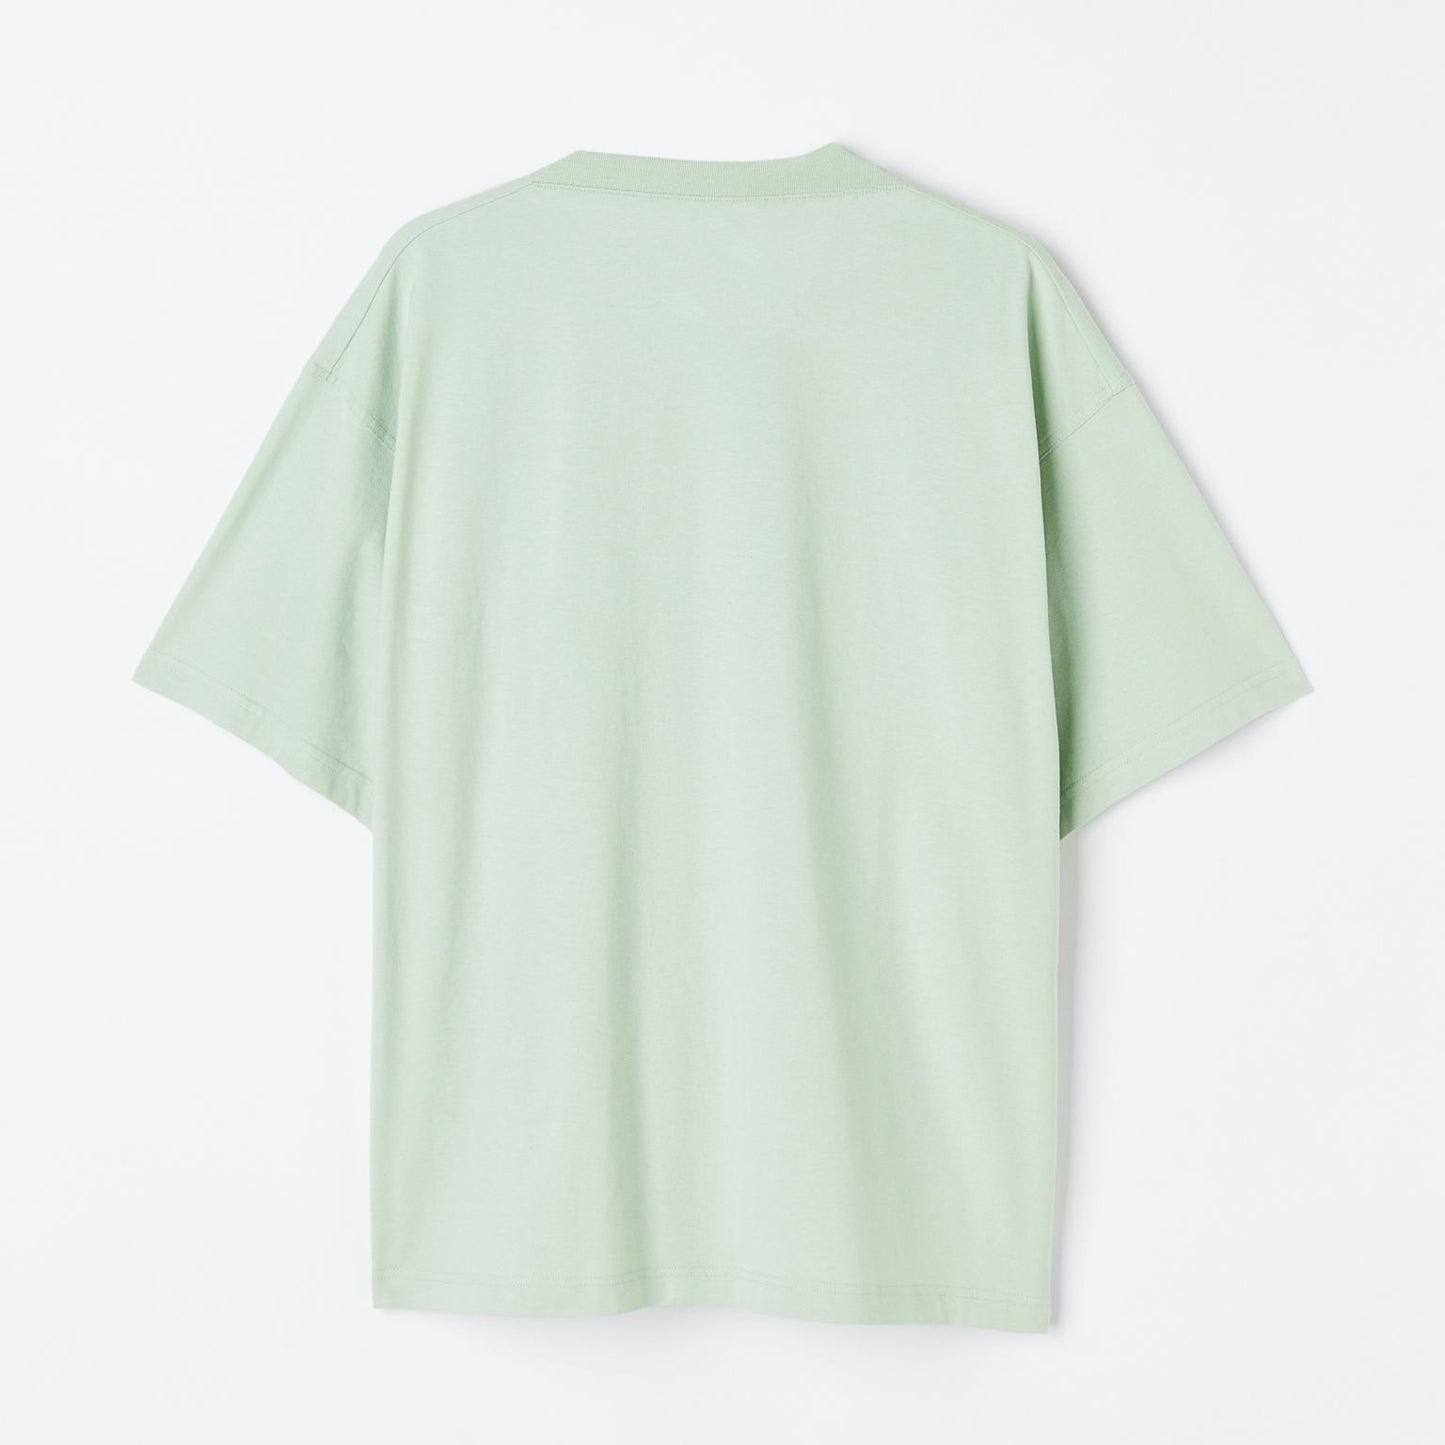 Lucky Me Printed Oversized Mint Green Cotton T-shirt